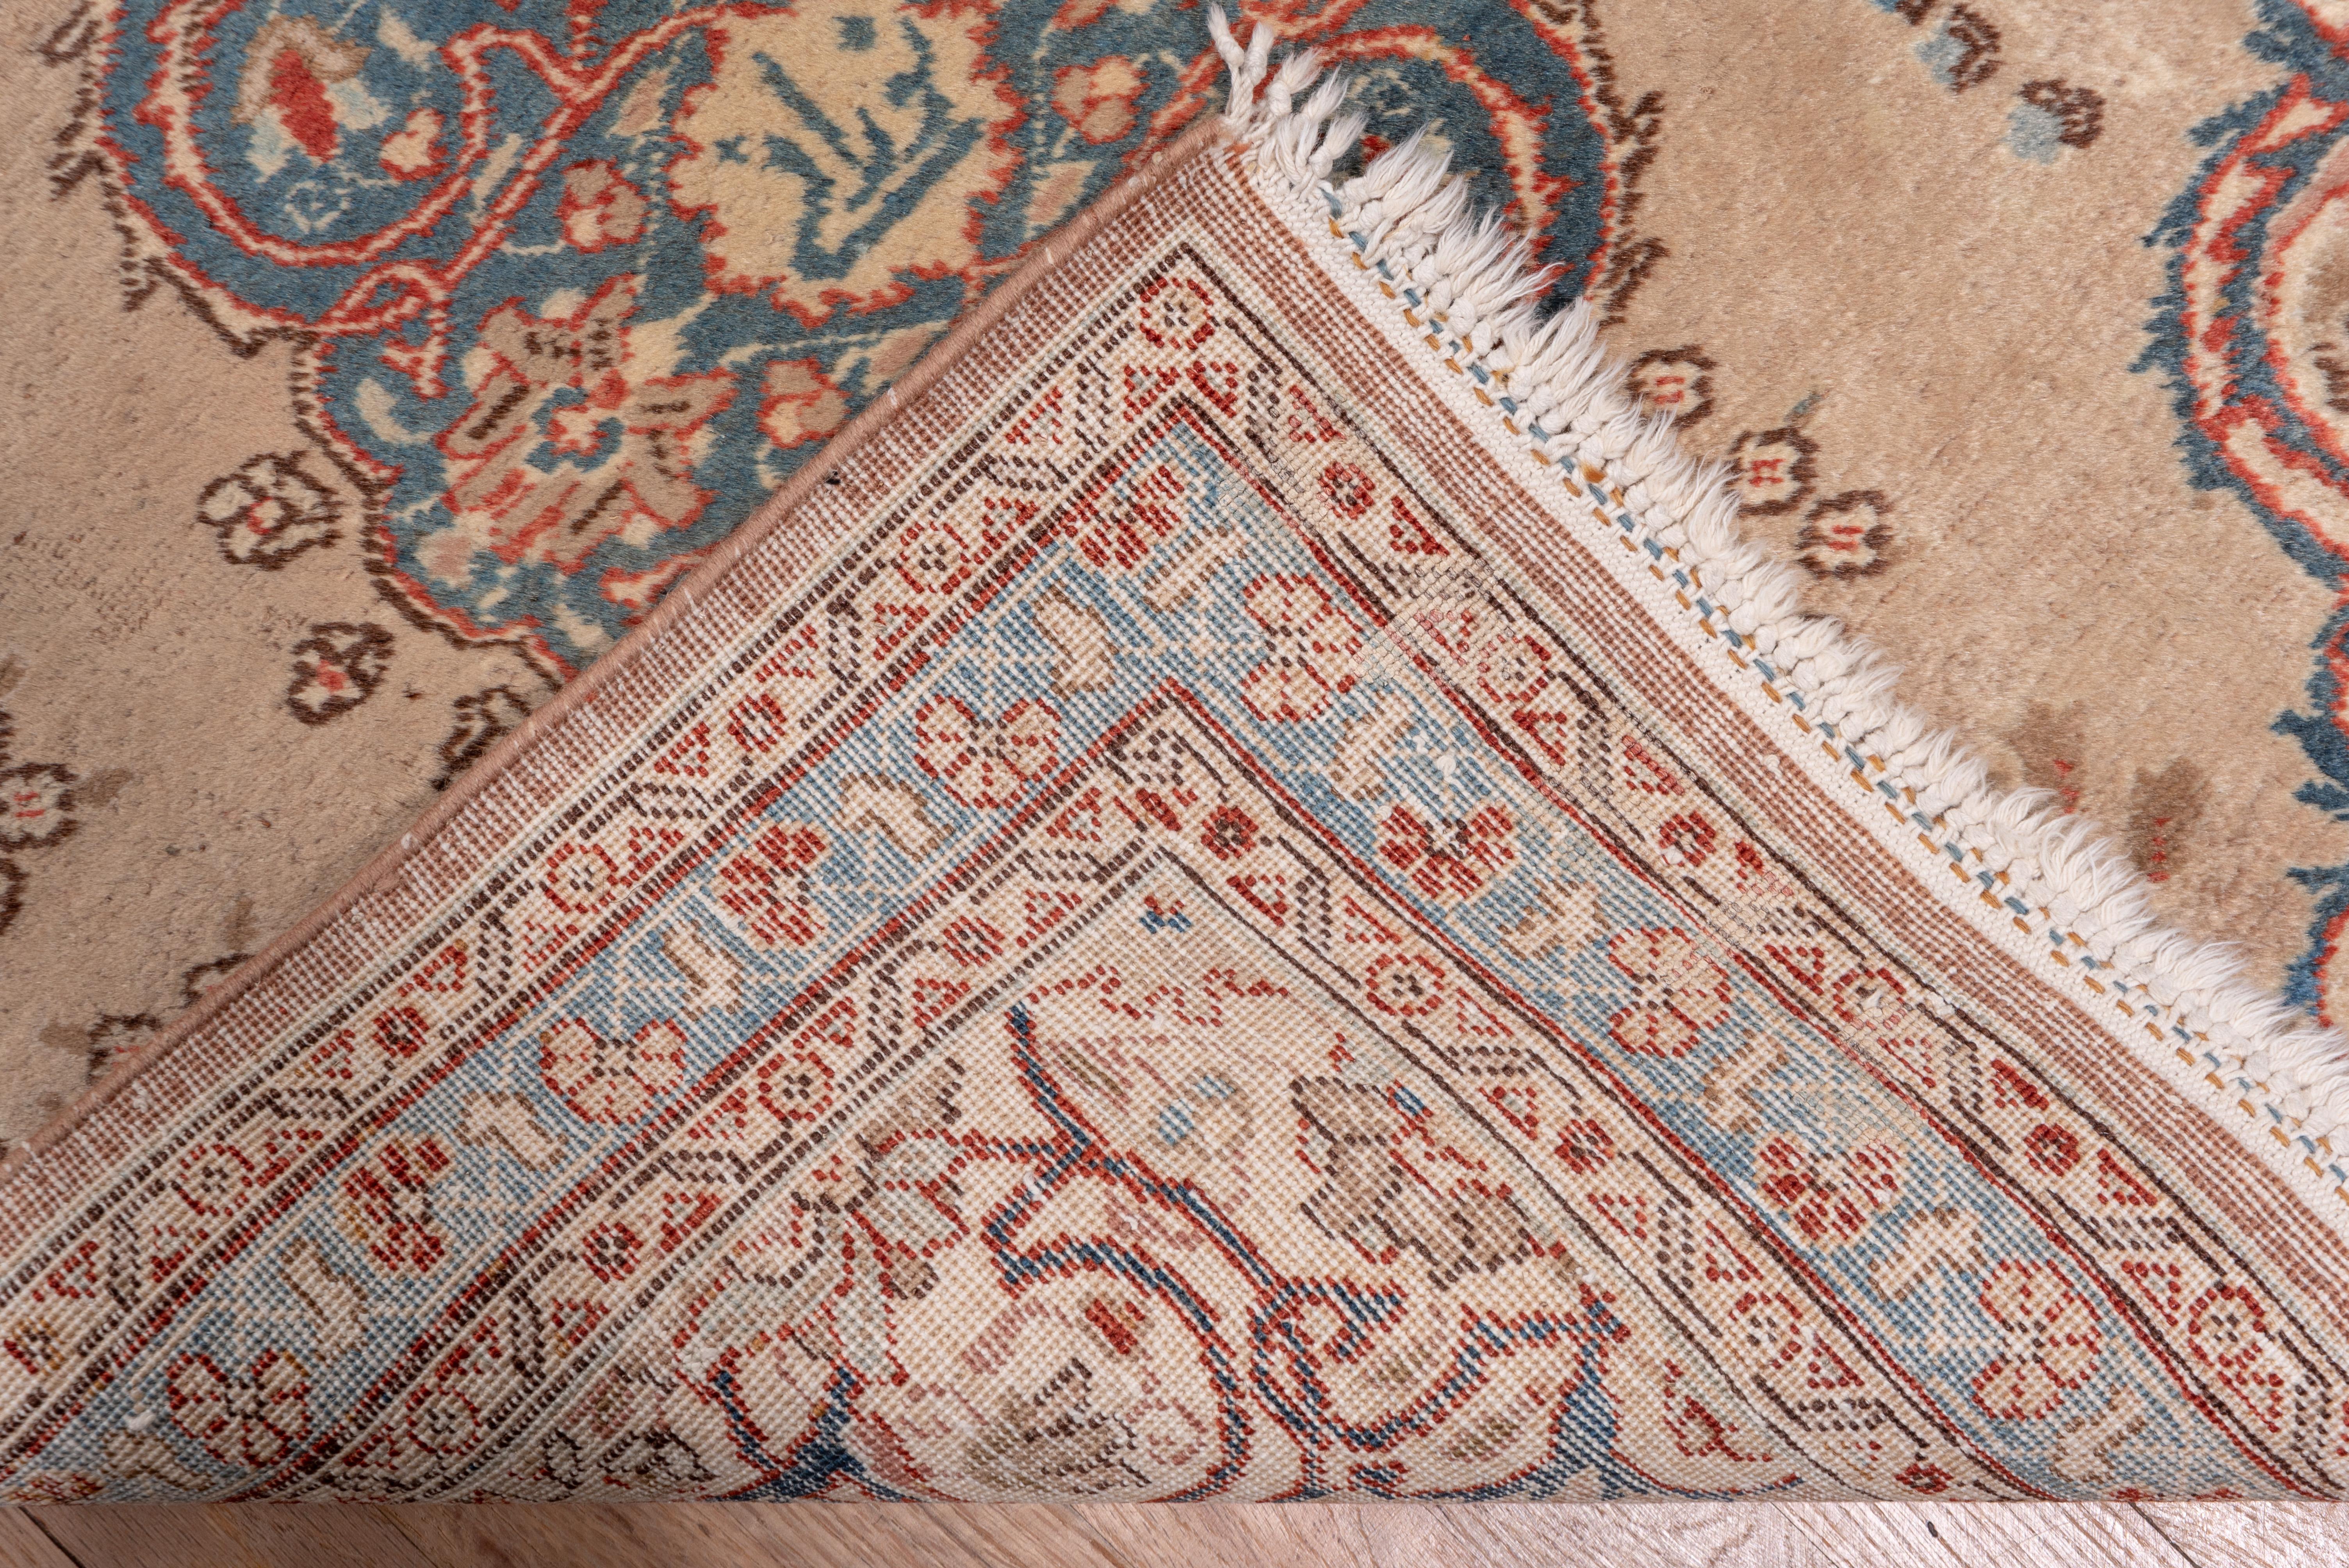 The light brown field features six-light blue floating cusped elliptical arabesque medallions with en suite ivory half medallions along the sides. Very narrow pale blue border with tilted fan palmettes. Well woven. Medium full pile, cotton